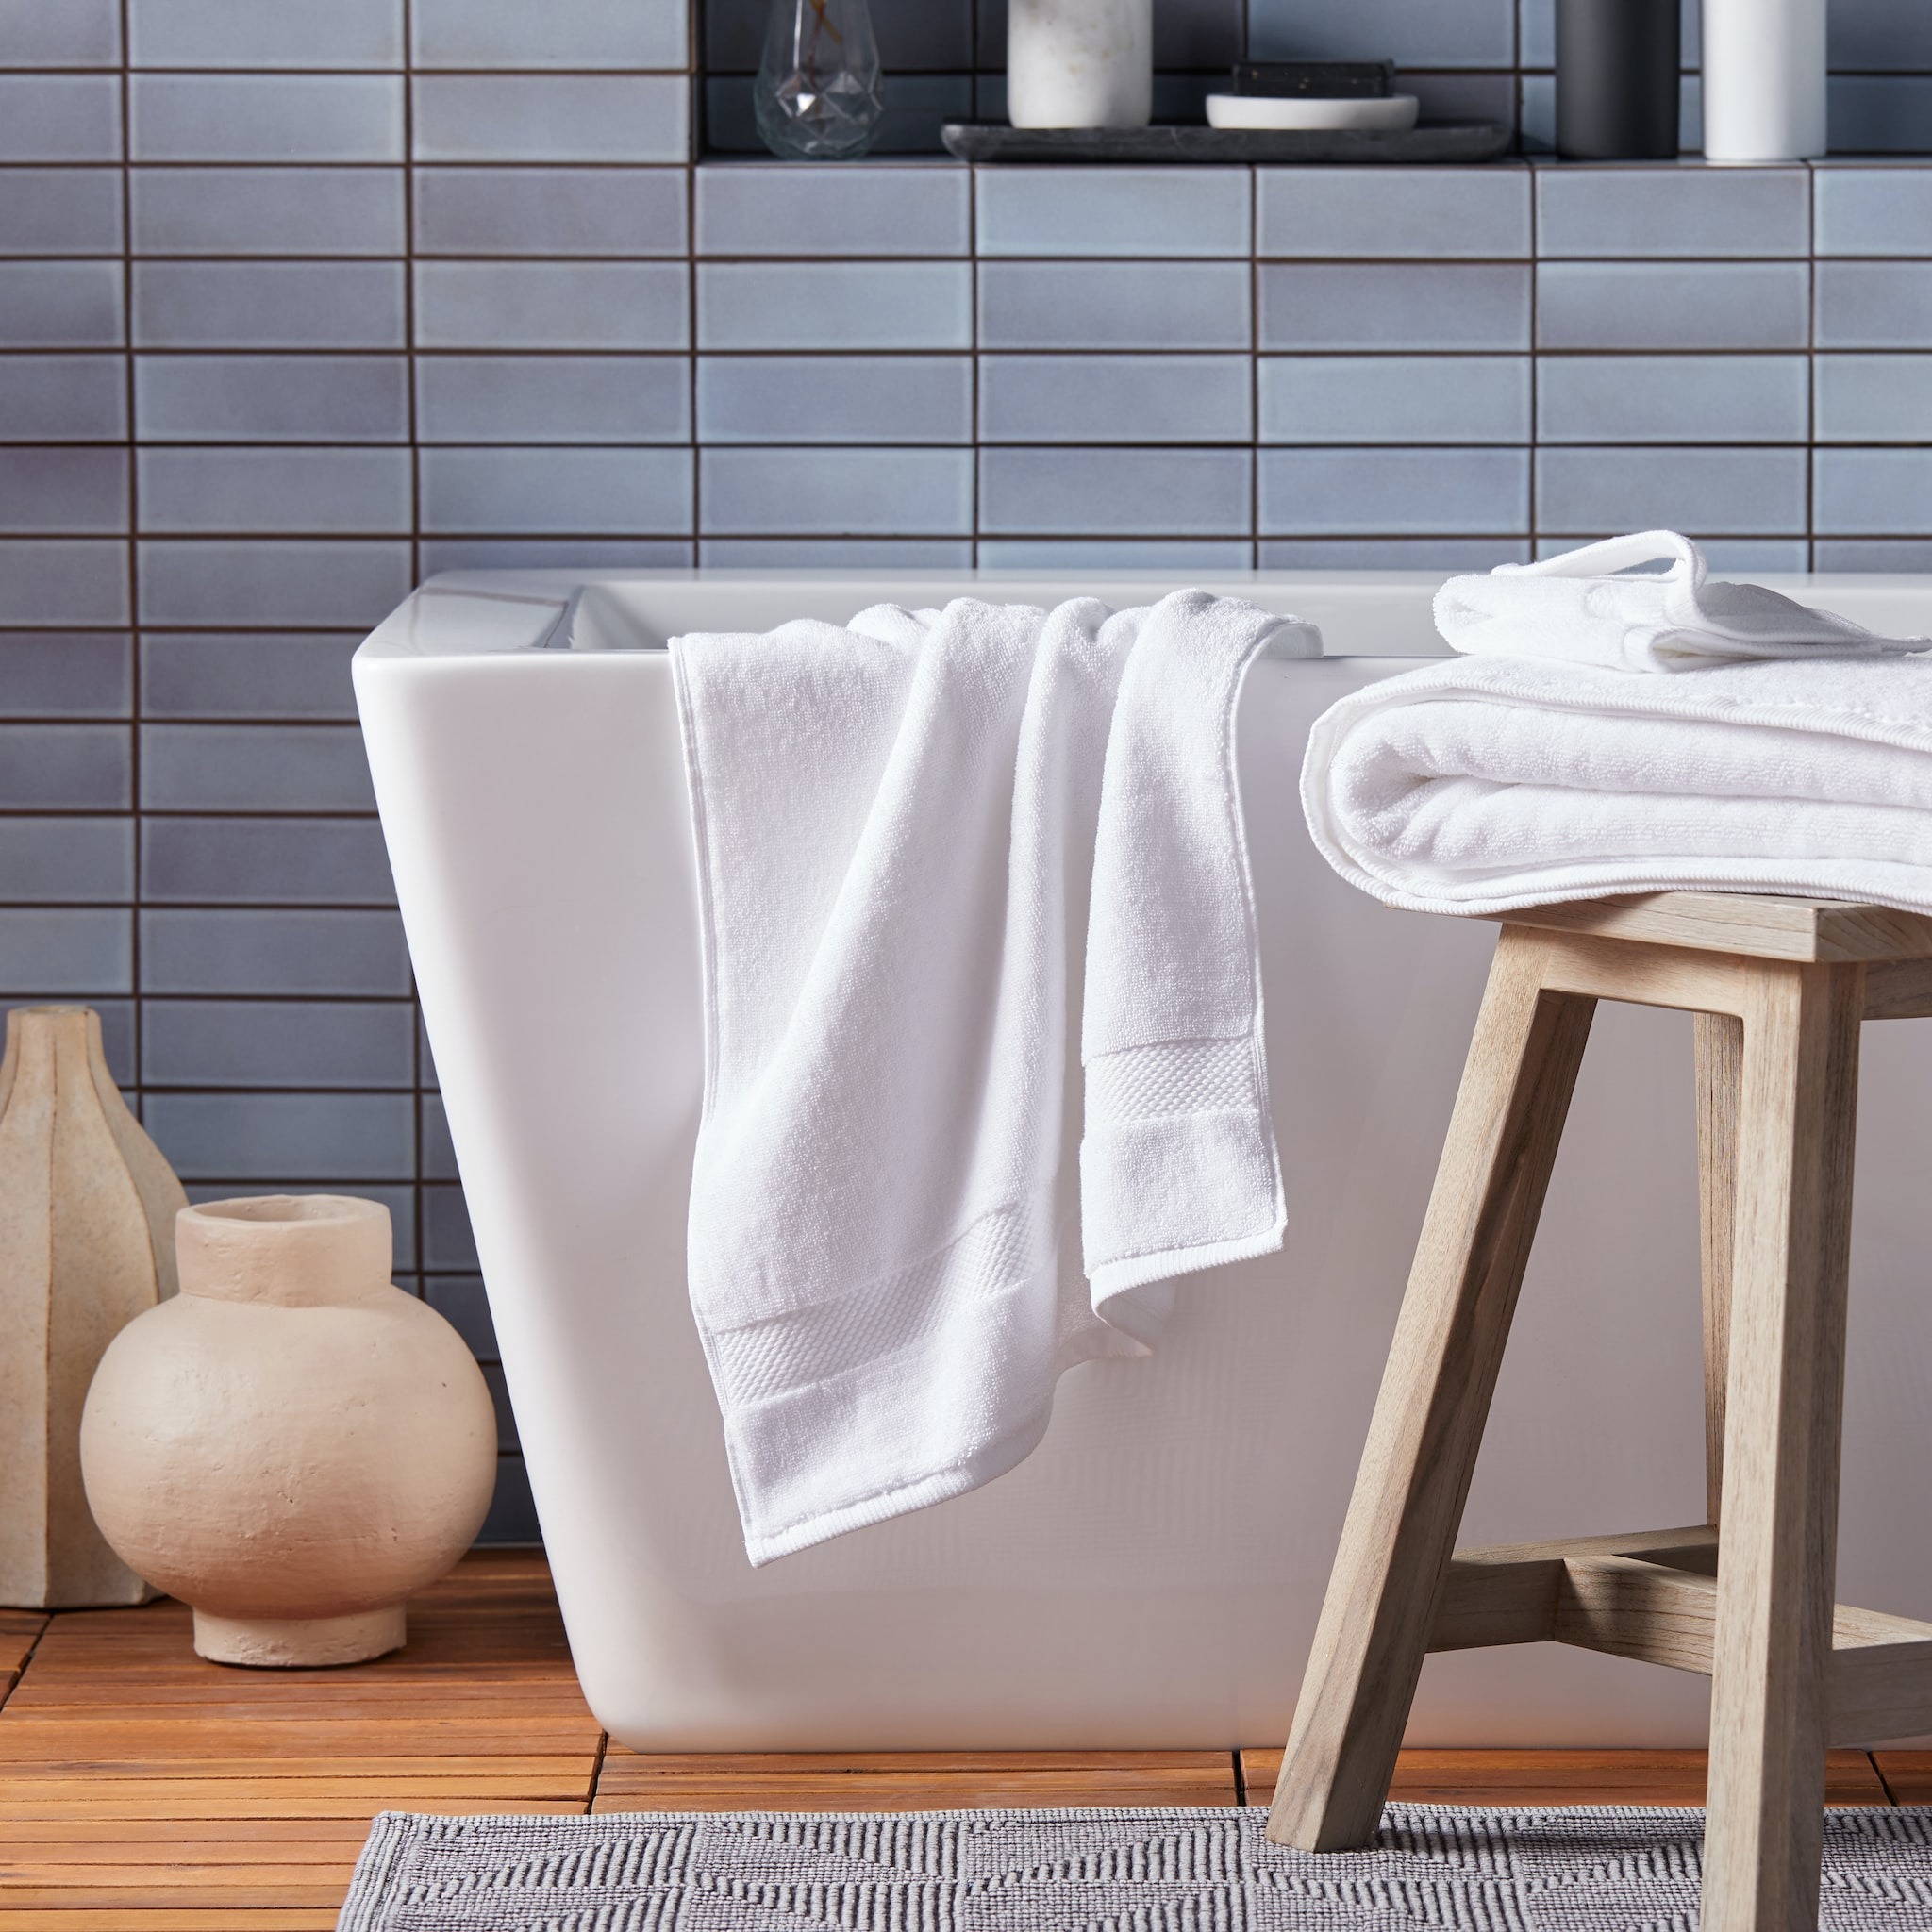 Want to Make Your Bathroom a Space for Indulgence? Here's How